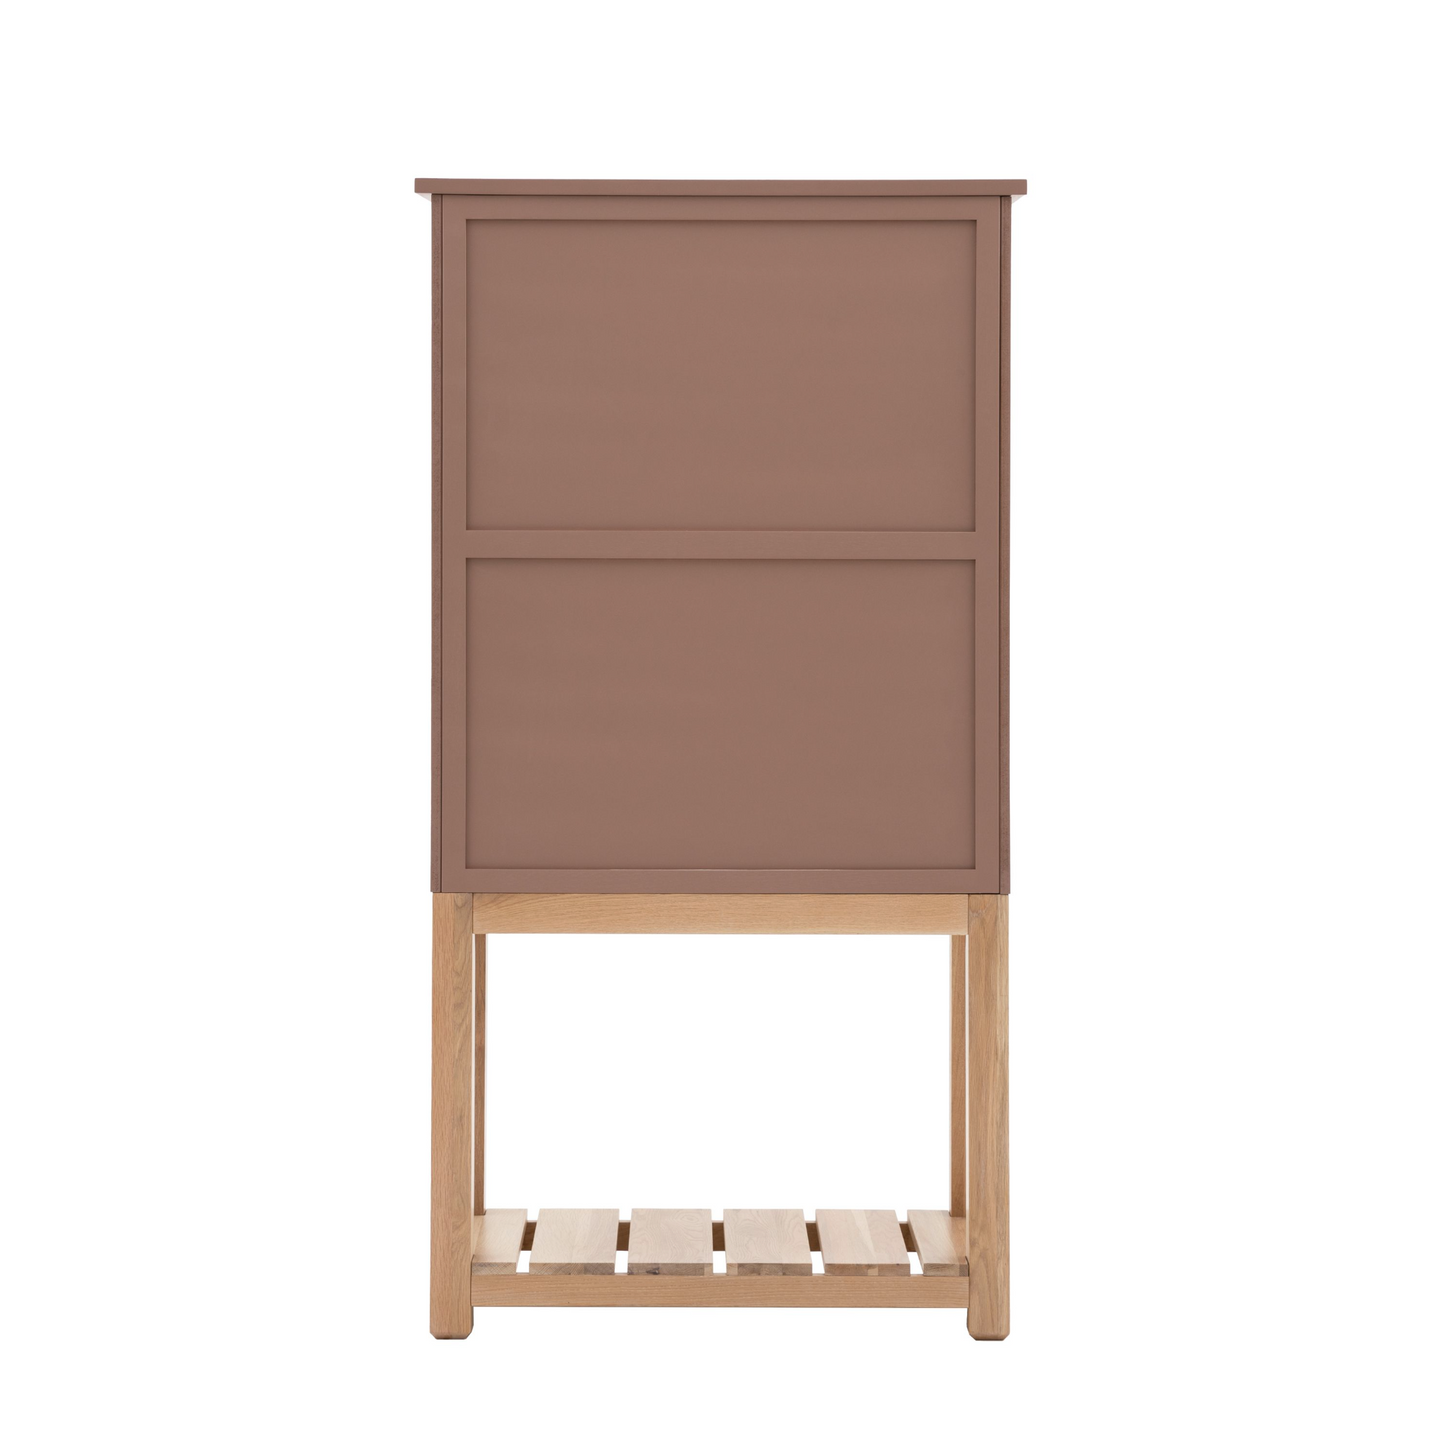 A home furniture storage cupboard from Kikiathome.co.uk with two drawers and a shelf in clay.